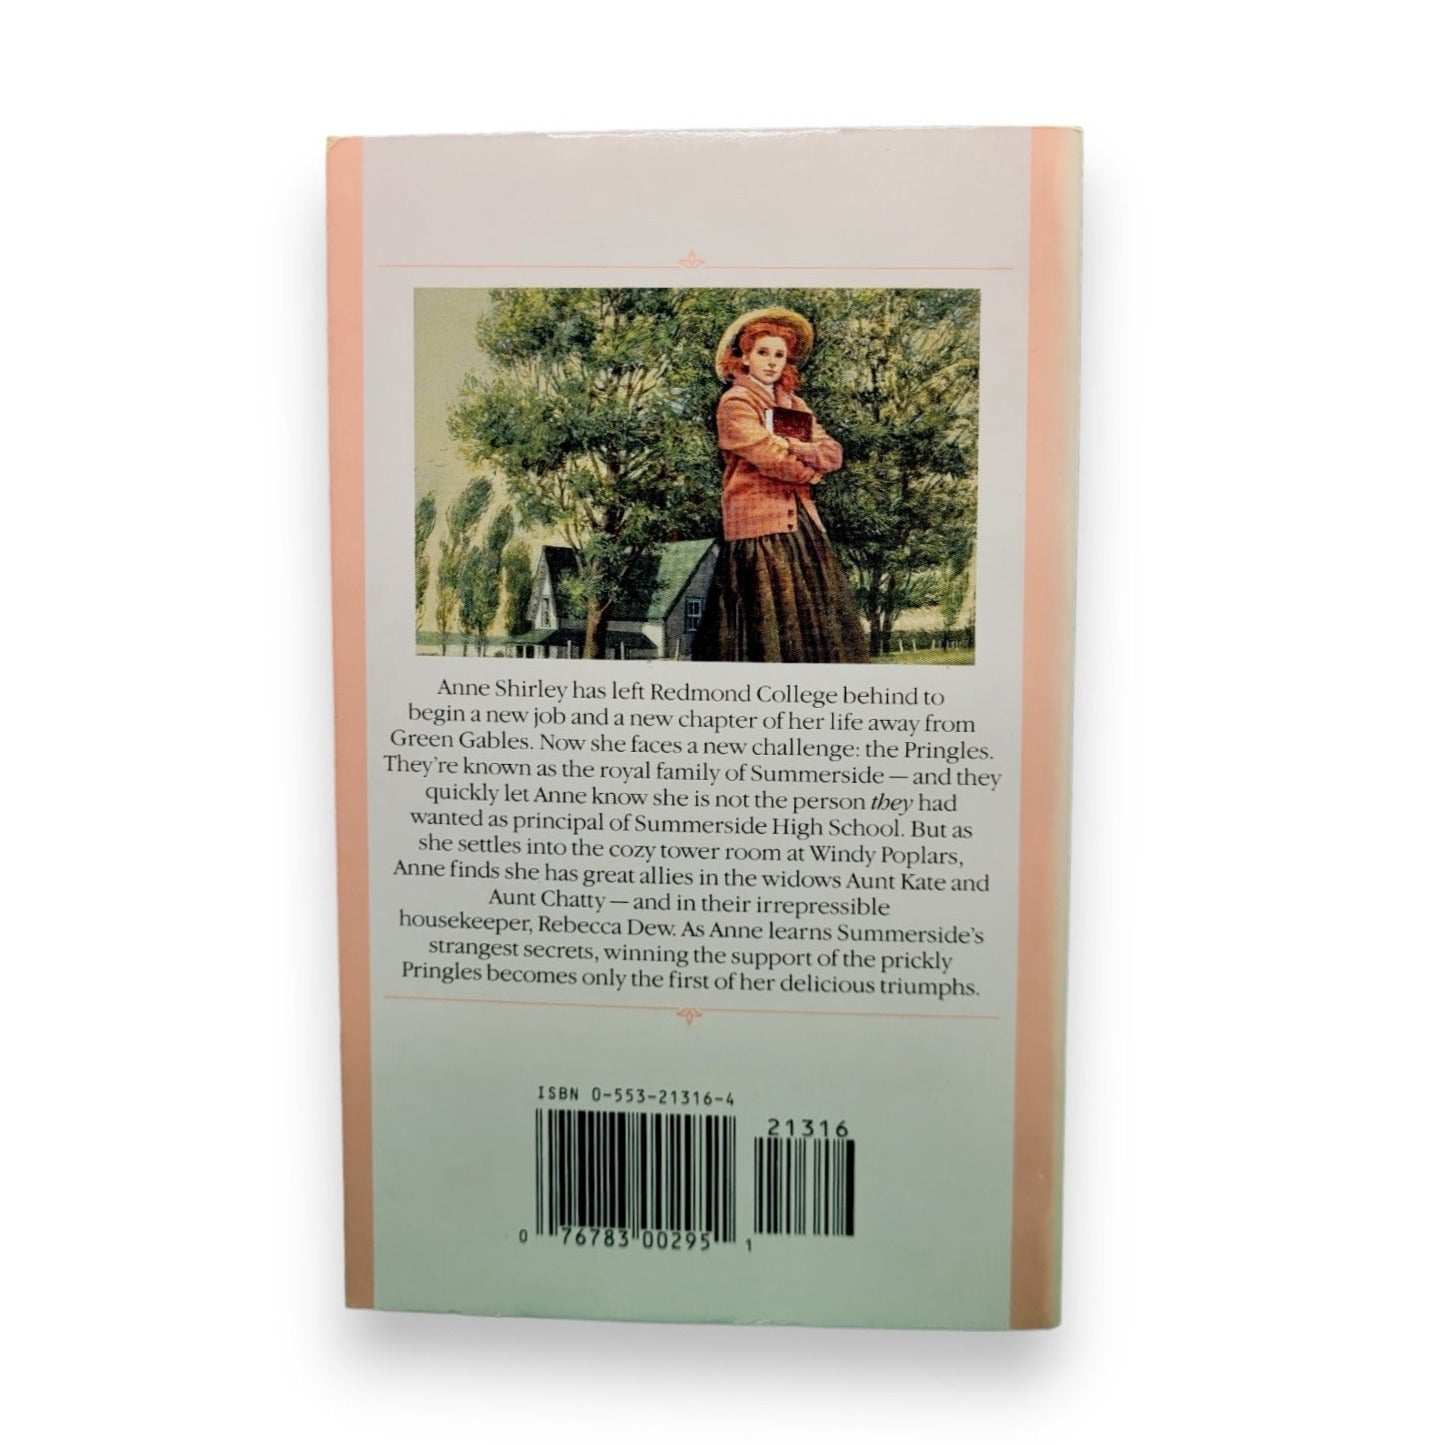 The Anne of Green Gables [Complete Set 1-8] by L.M. Montgomery 1992